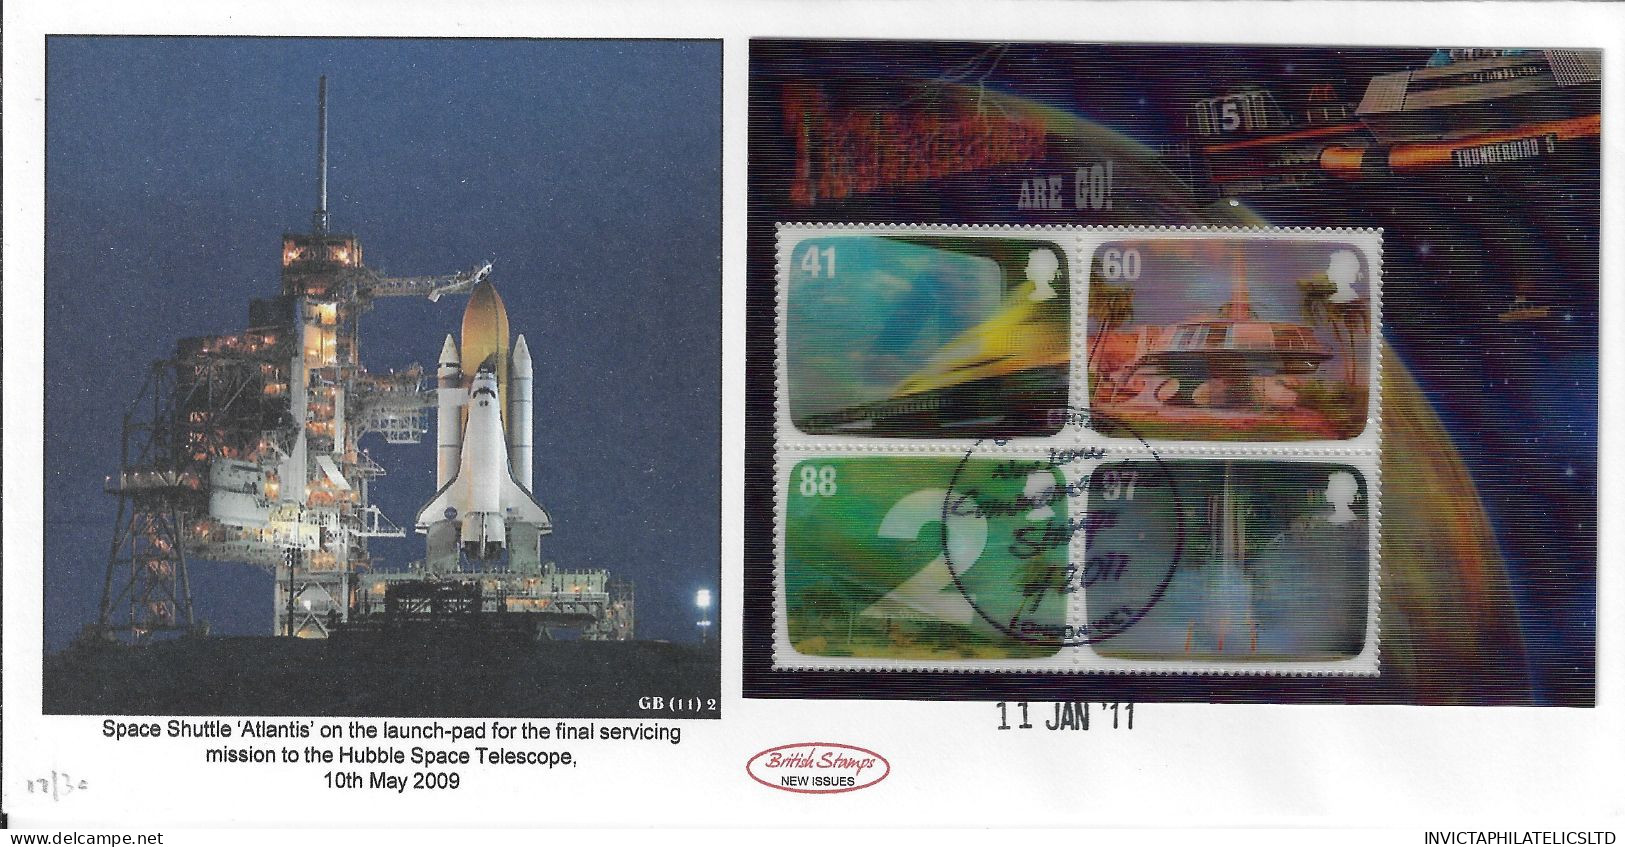 GB 2011 THUNDERBIRDS MINI SHEET, CAMBRIDGE STAMP CENTRE OFFICIAL FDC, 30 PRODUCED ONLY - 2011-2020 Em. Décimales